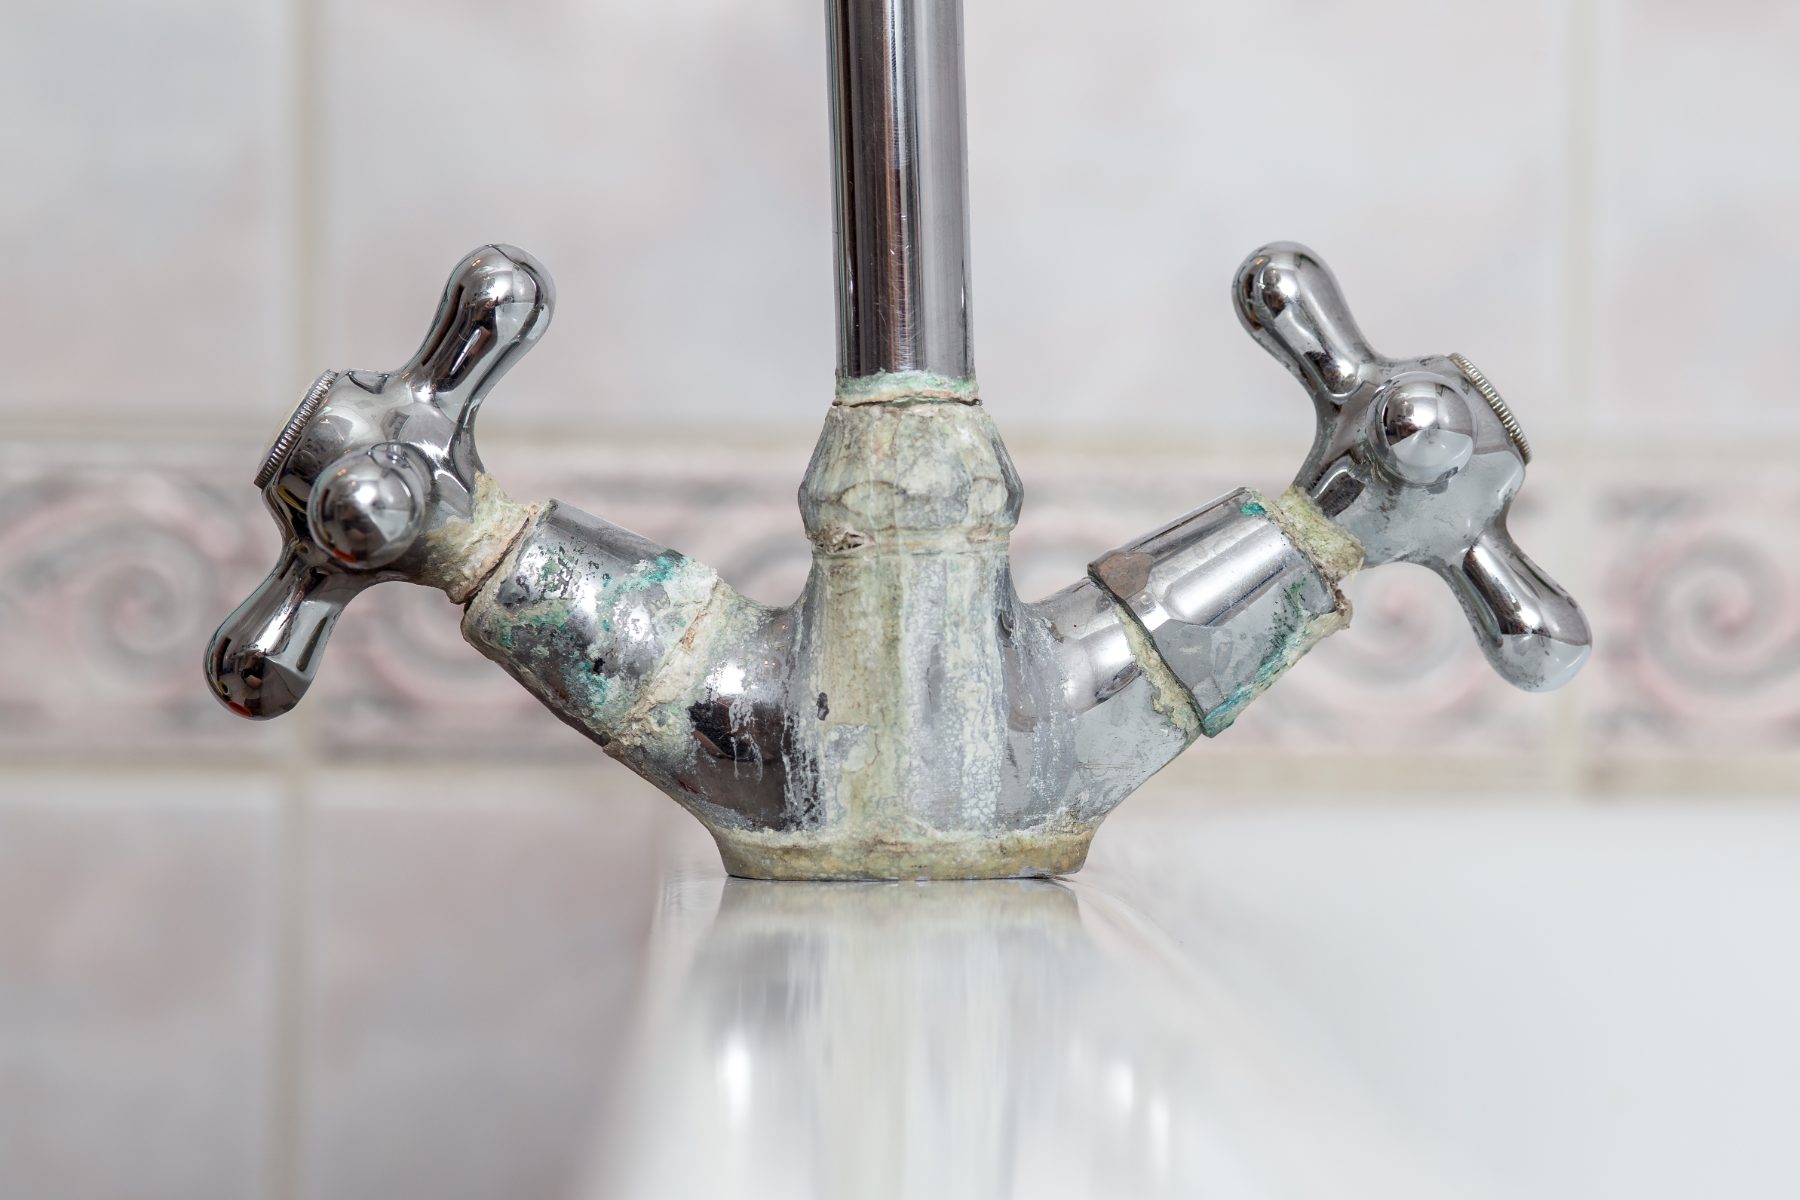 remove limescale from bathroom sink